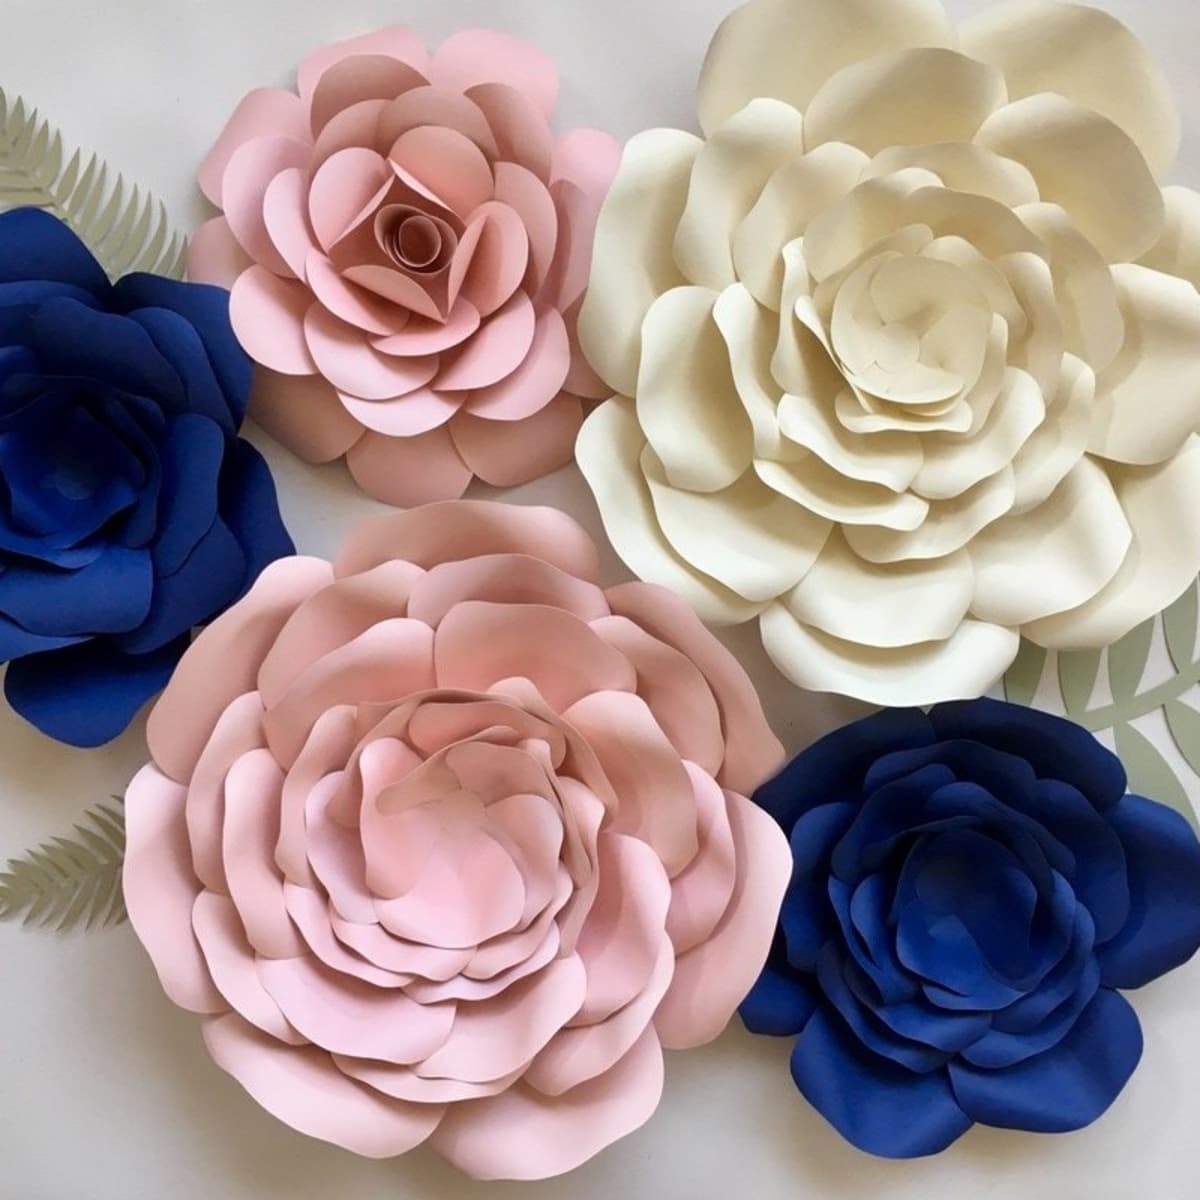 Crepe Paper Flowers: Delicate, Durable and DIY